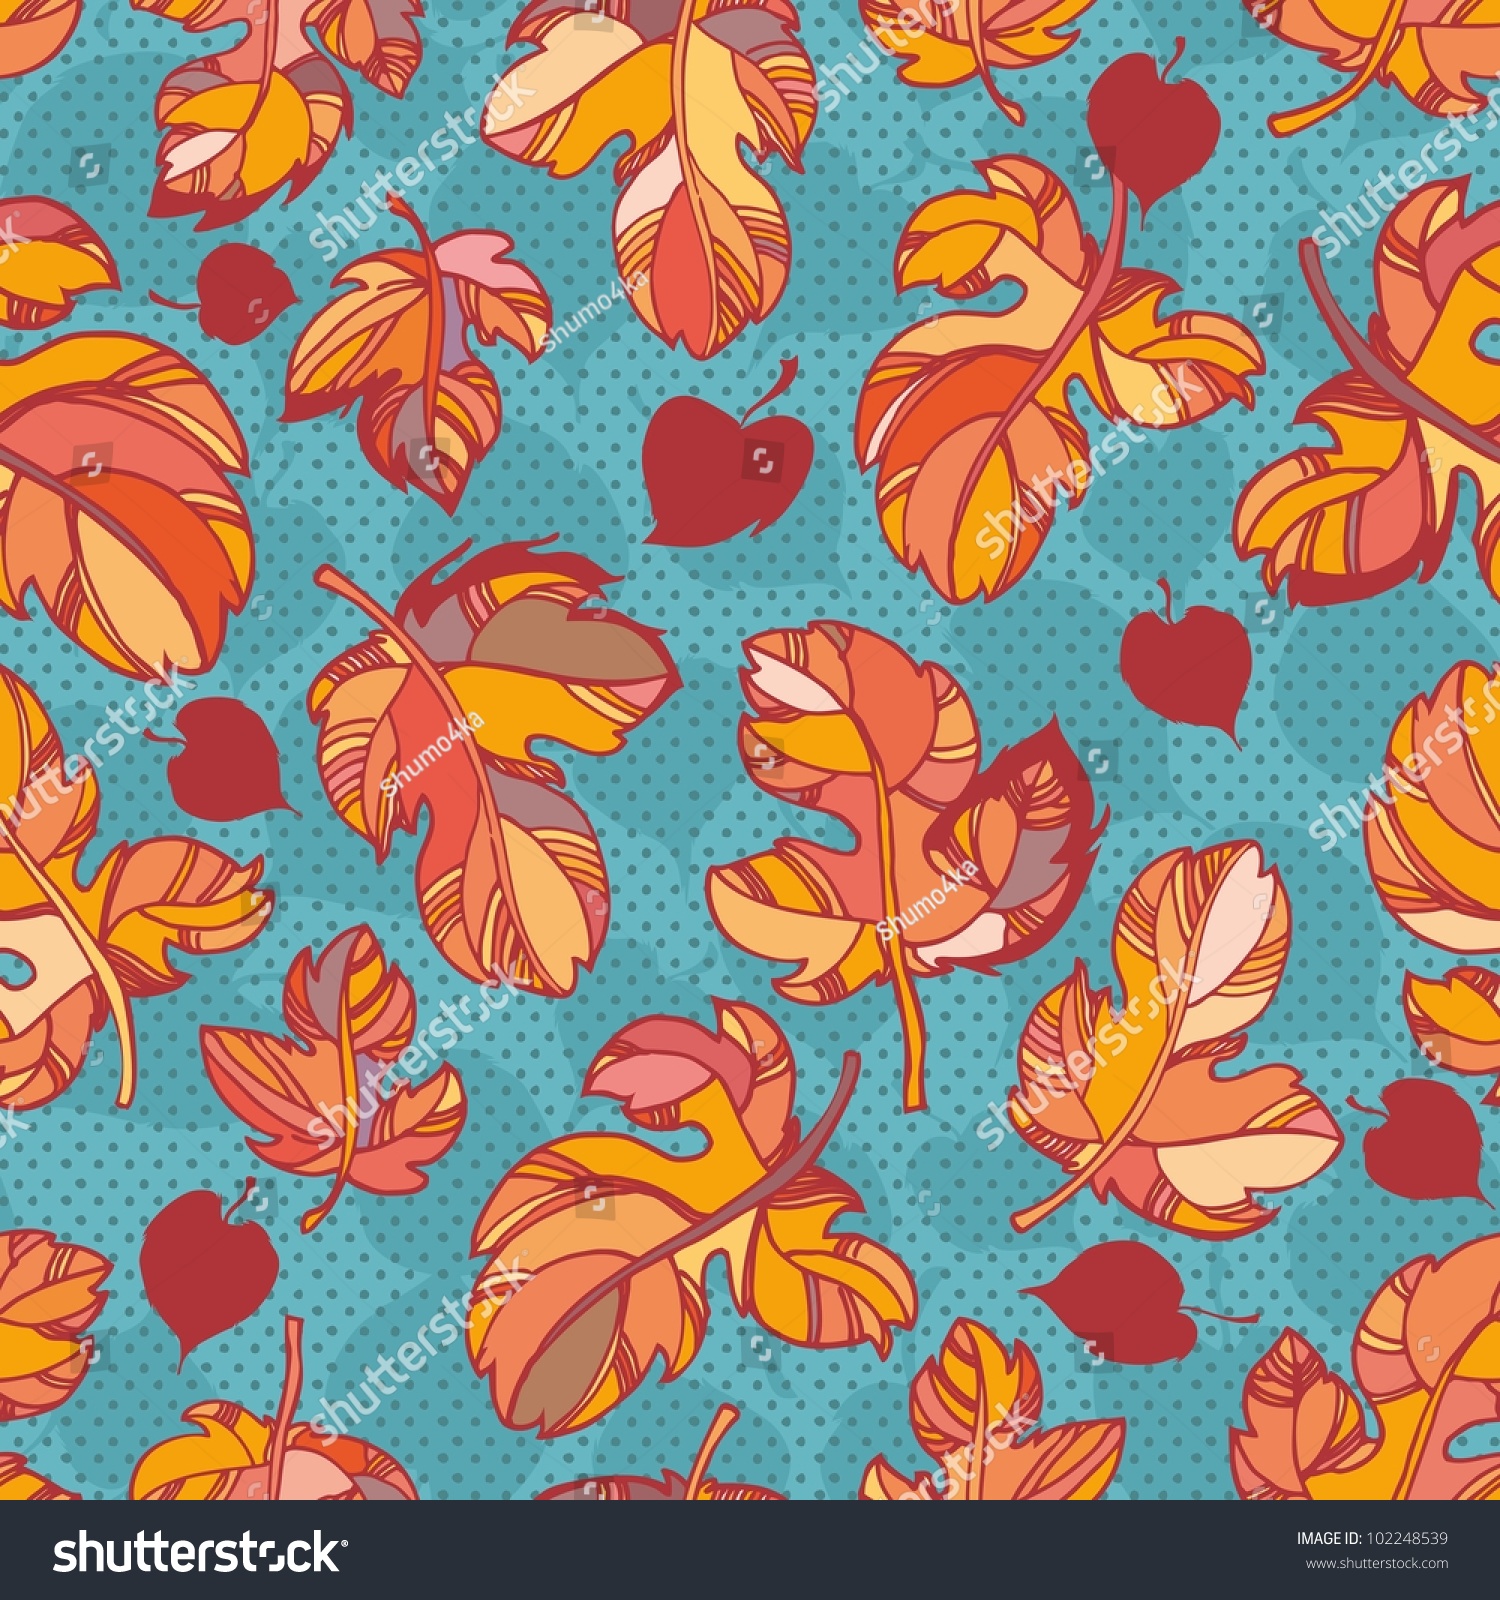 Colorful Autumn Leaves. Outlines And Bright Colors Stock Vector